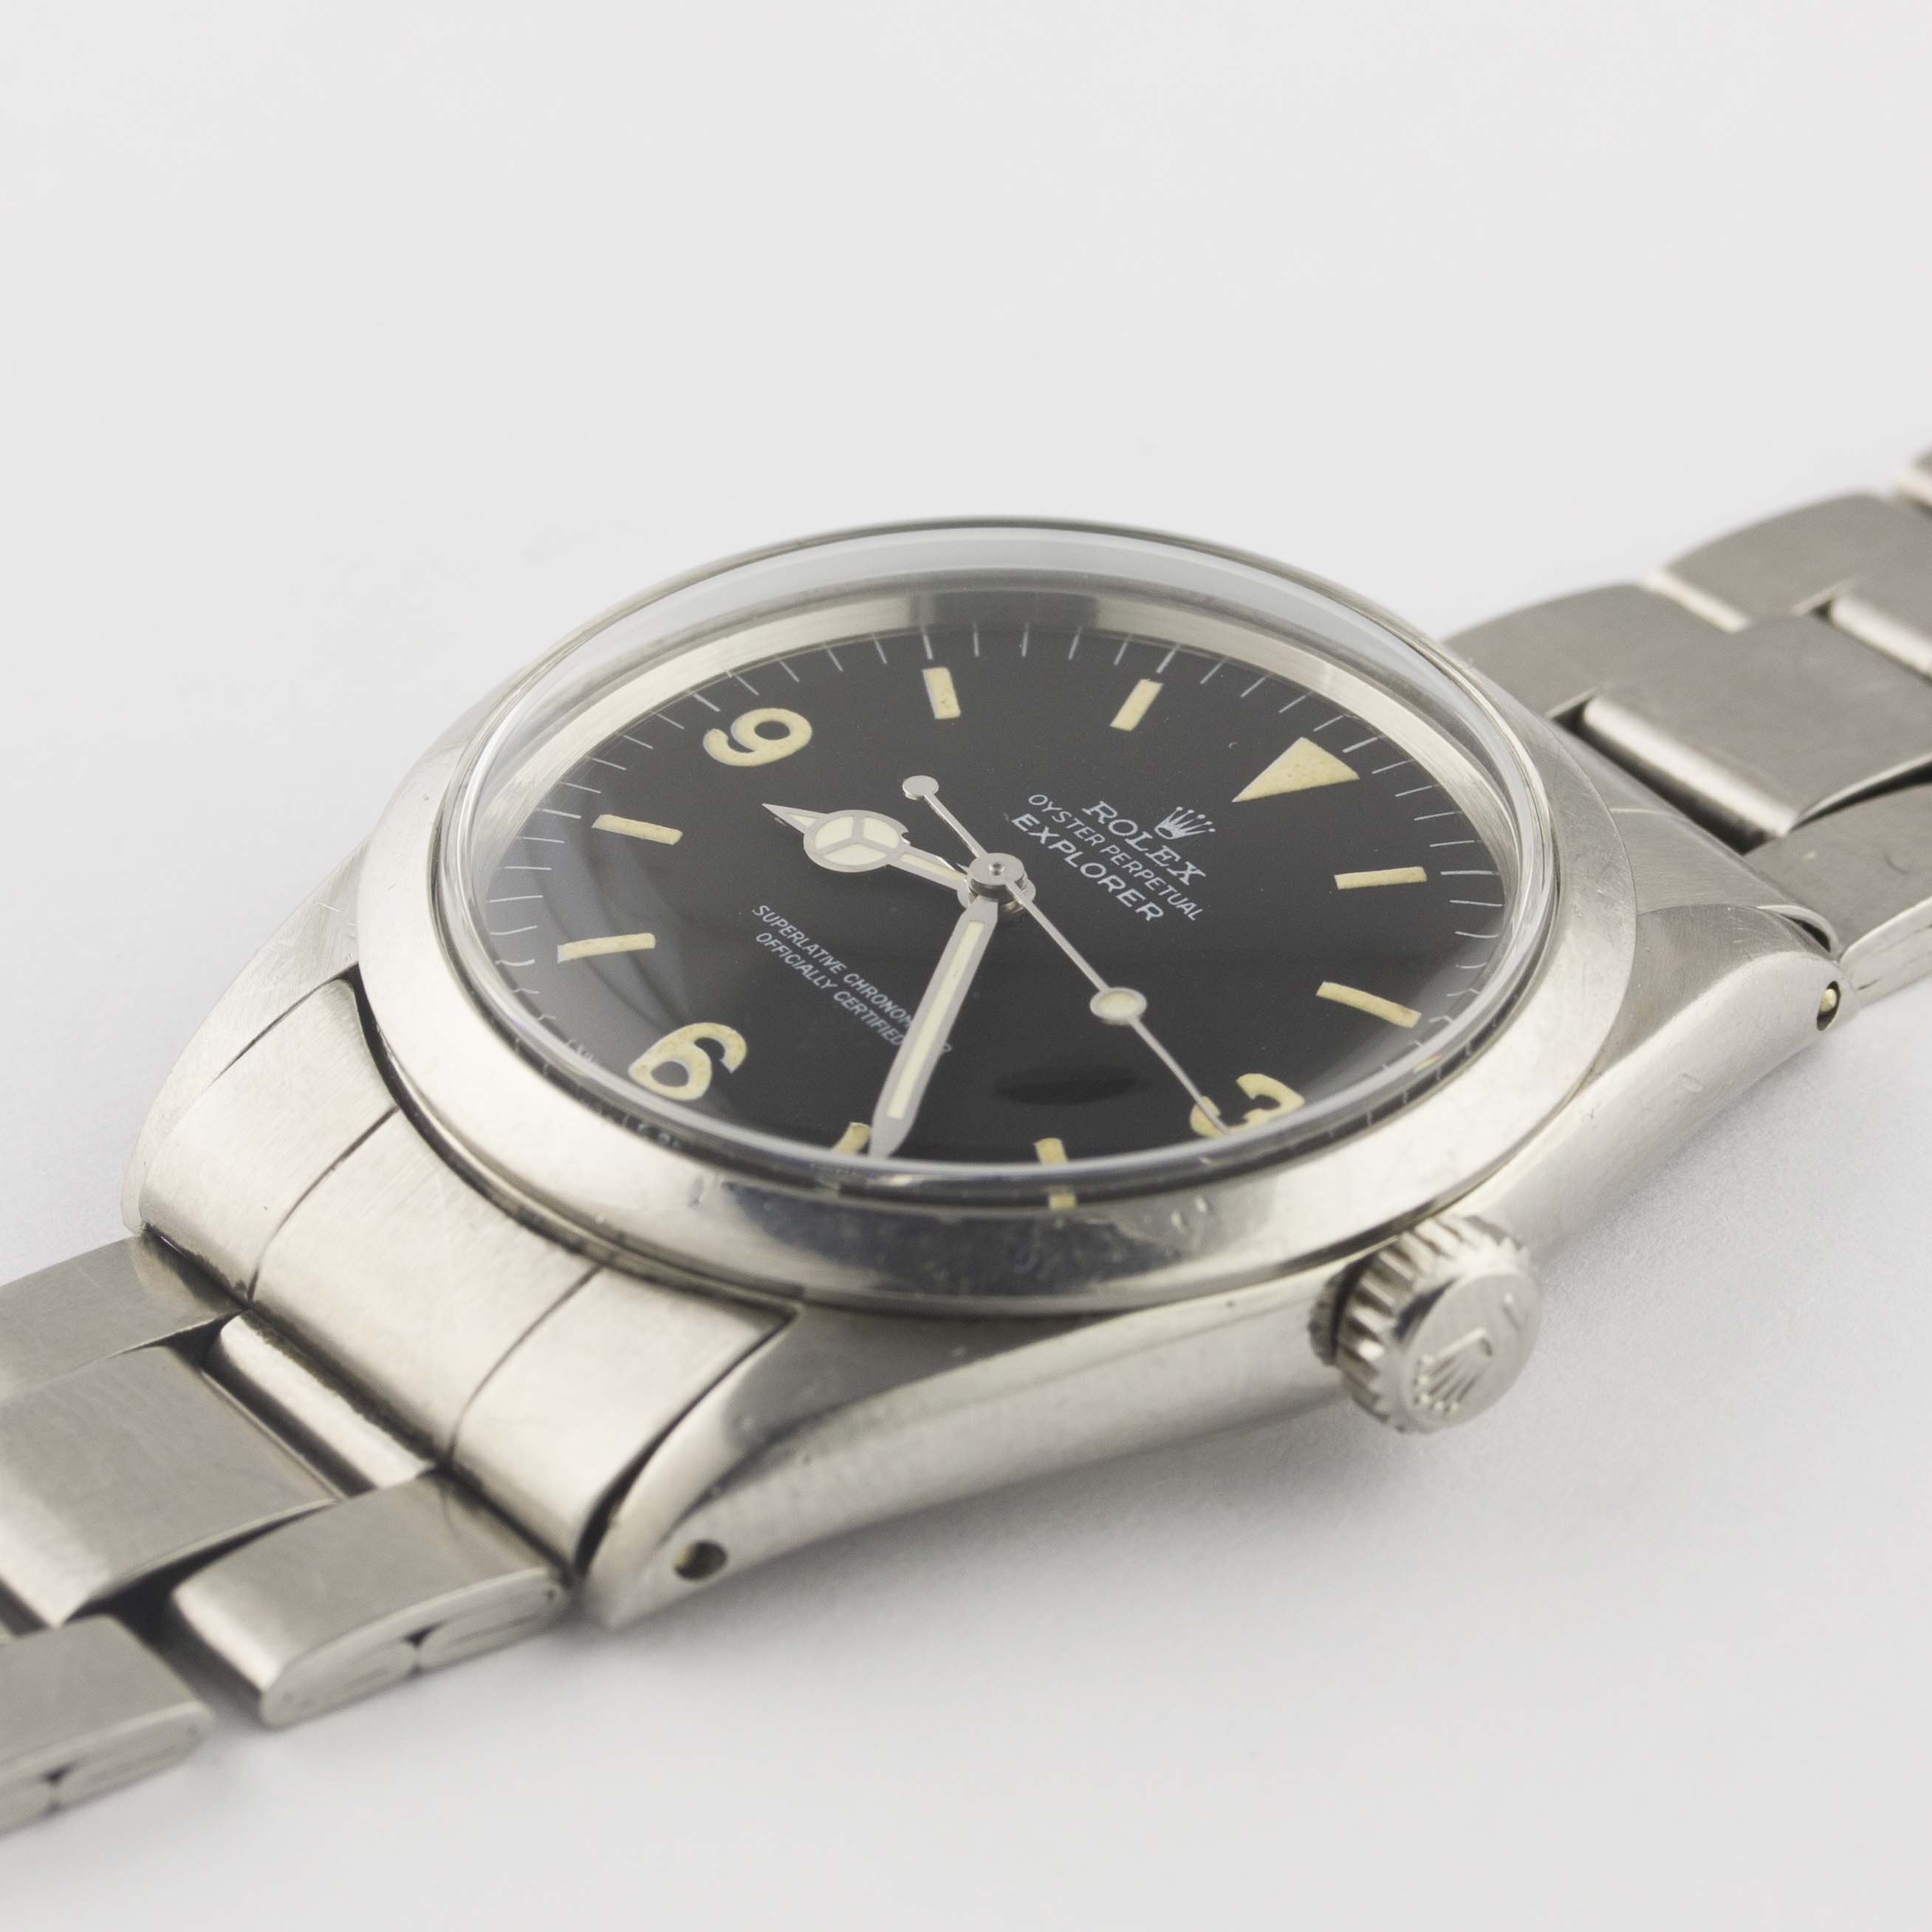 A GENTLEMAN'S STAINLESS STEEL ROLEX OYSTER PERPETUAL EXPLORER BRACELET WATCH CIRCA 1963, REF. 1016 - Image 3 of 11